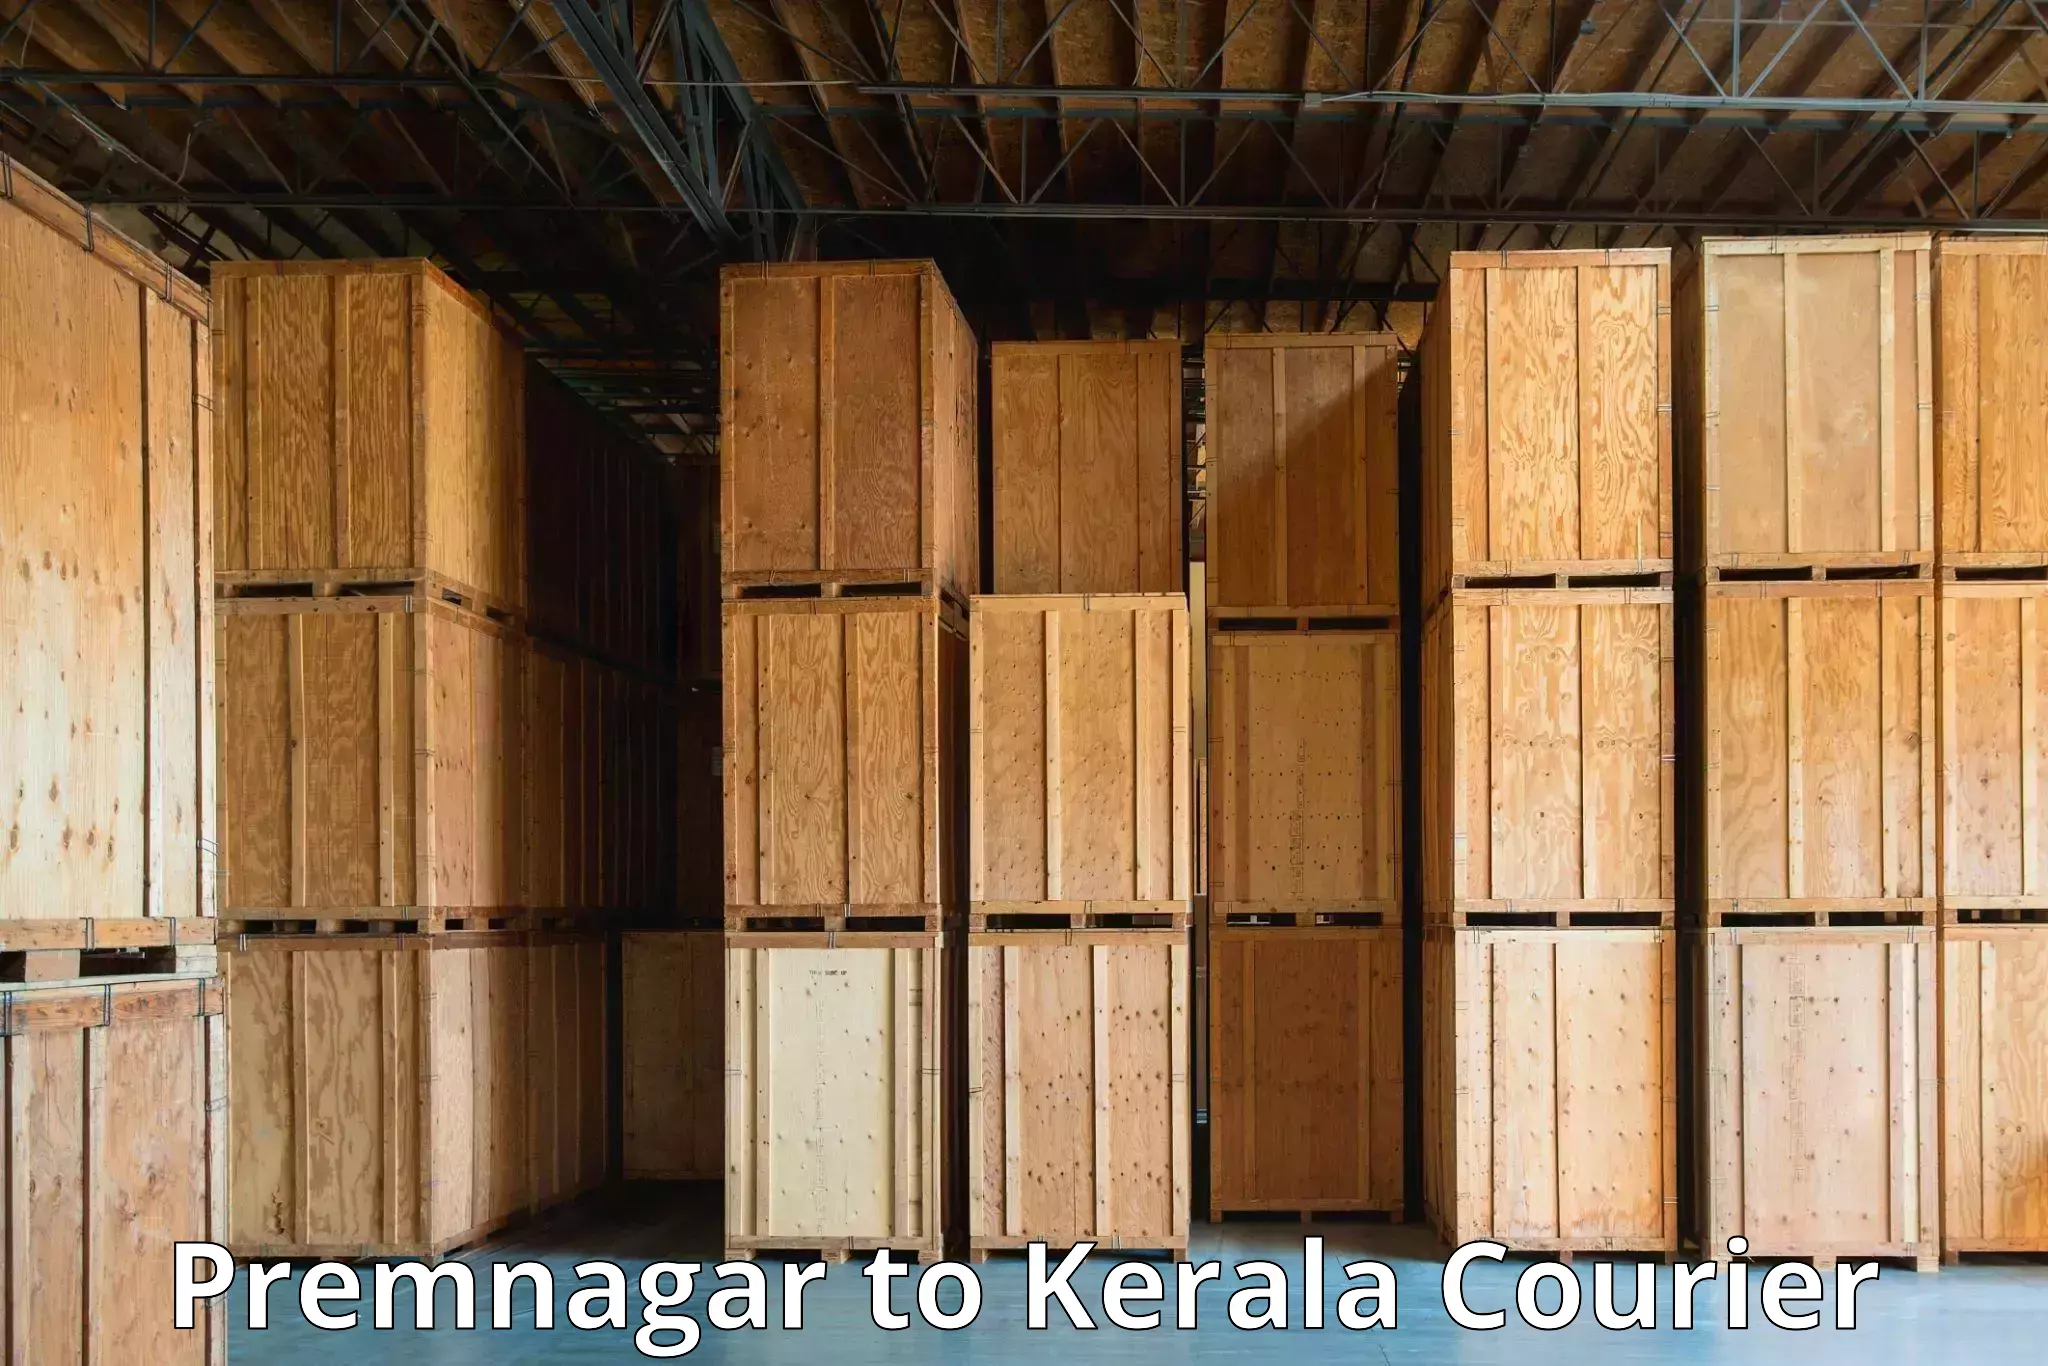 State-of-the-art courier technology Premnagar to Cochin Port Kochi